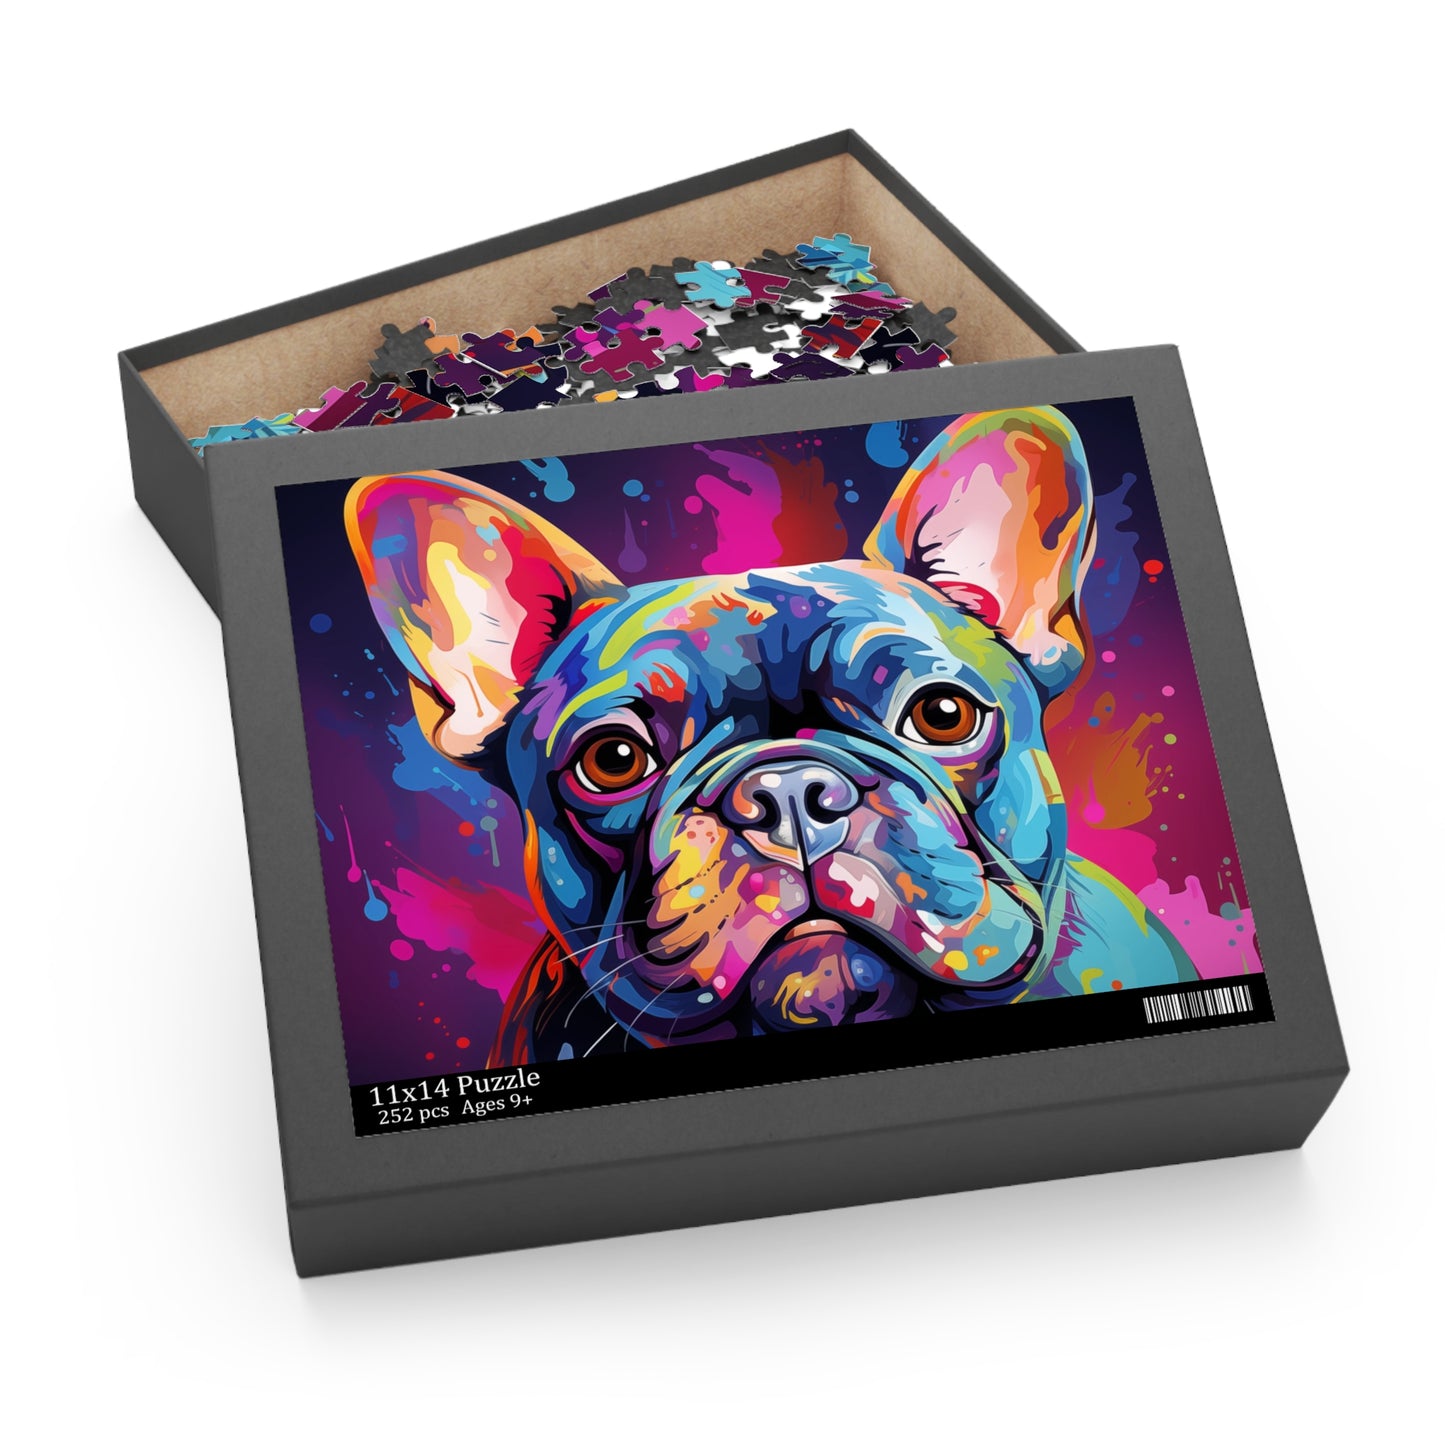 Oil Paint Watercolor Abstract Frenchie Dog Jigsaw Puzzle Adult Birthday Business Jigsaw Puzzle Gift for Him Funny Humorous Indoor Outdoor Game Gift For Her Online-8